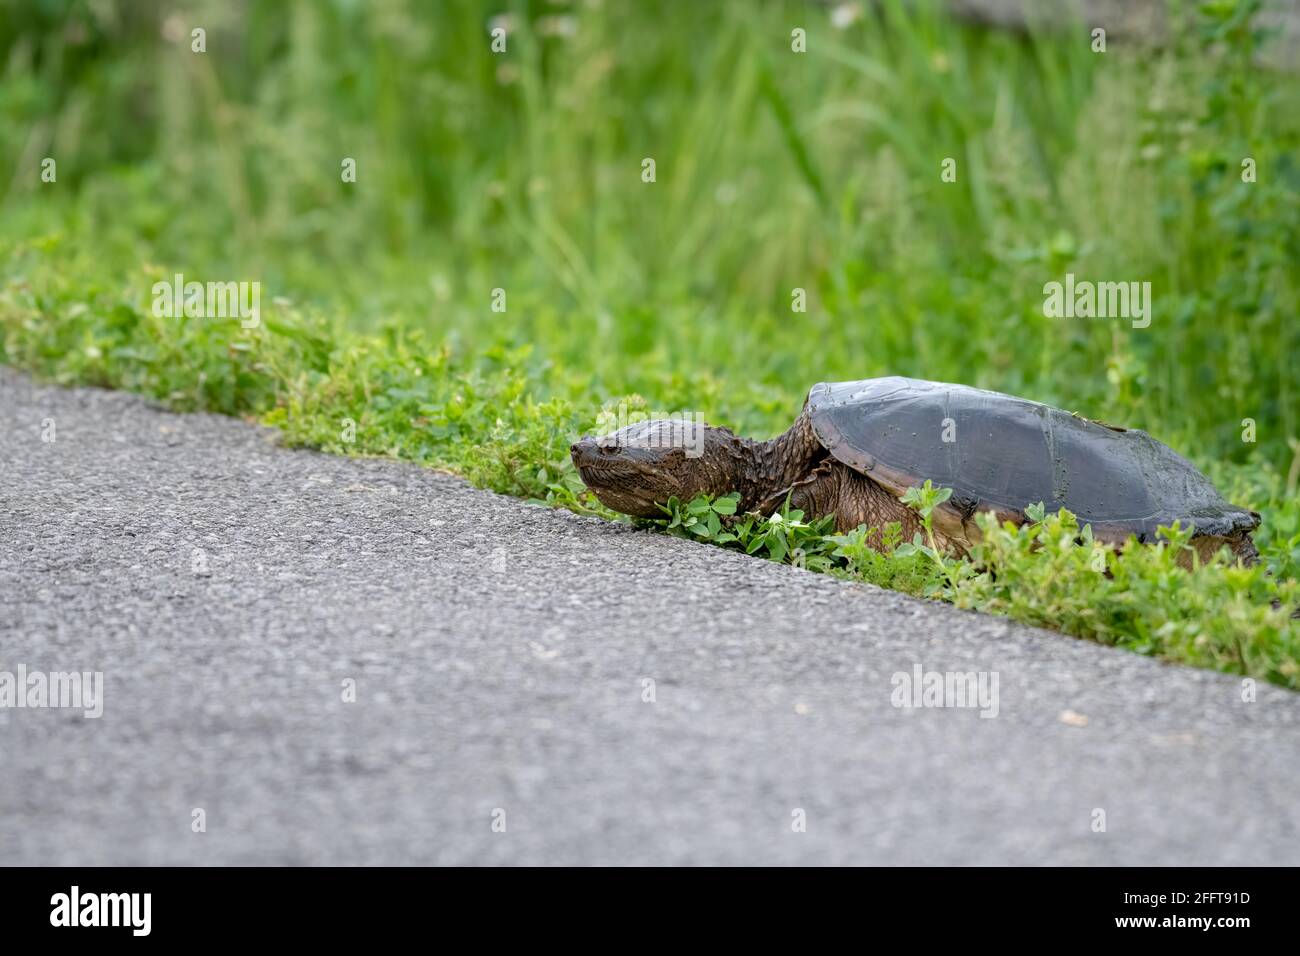 Snapping turtle about to cross a bike path after climbing uphill from a pond Stock Photo